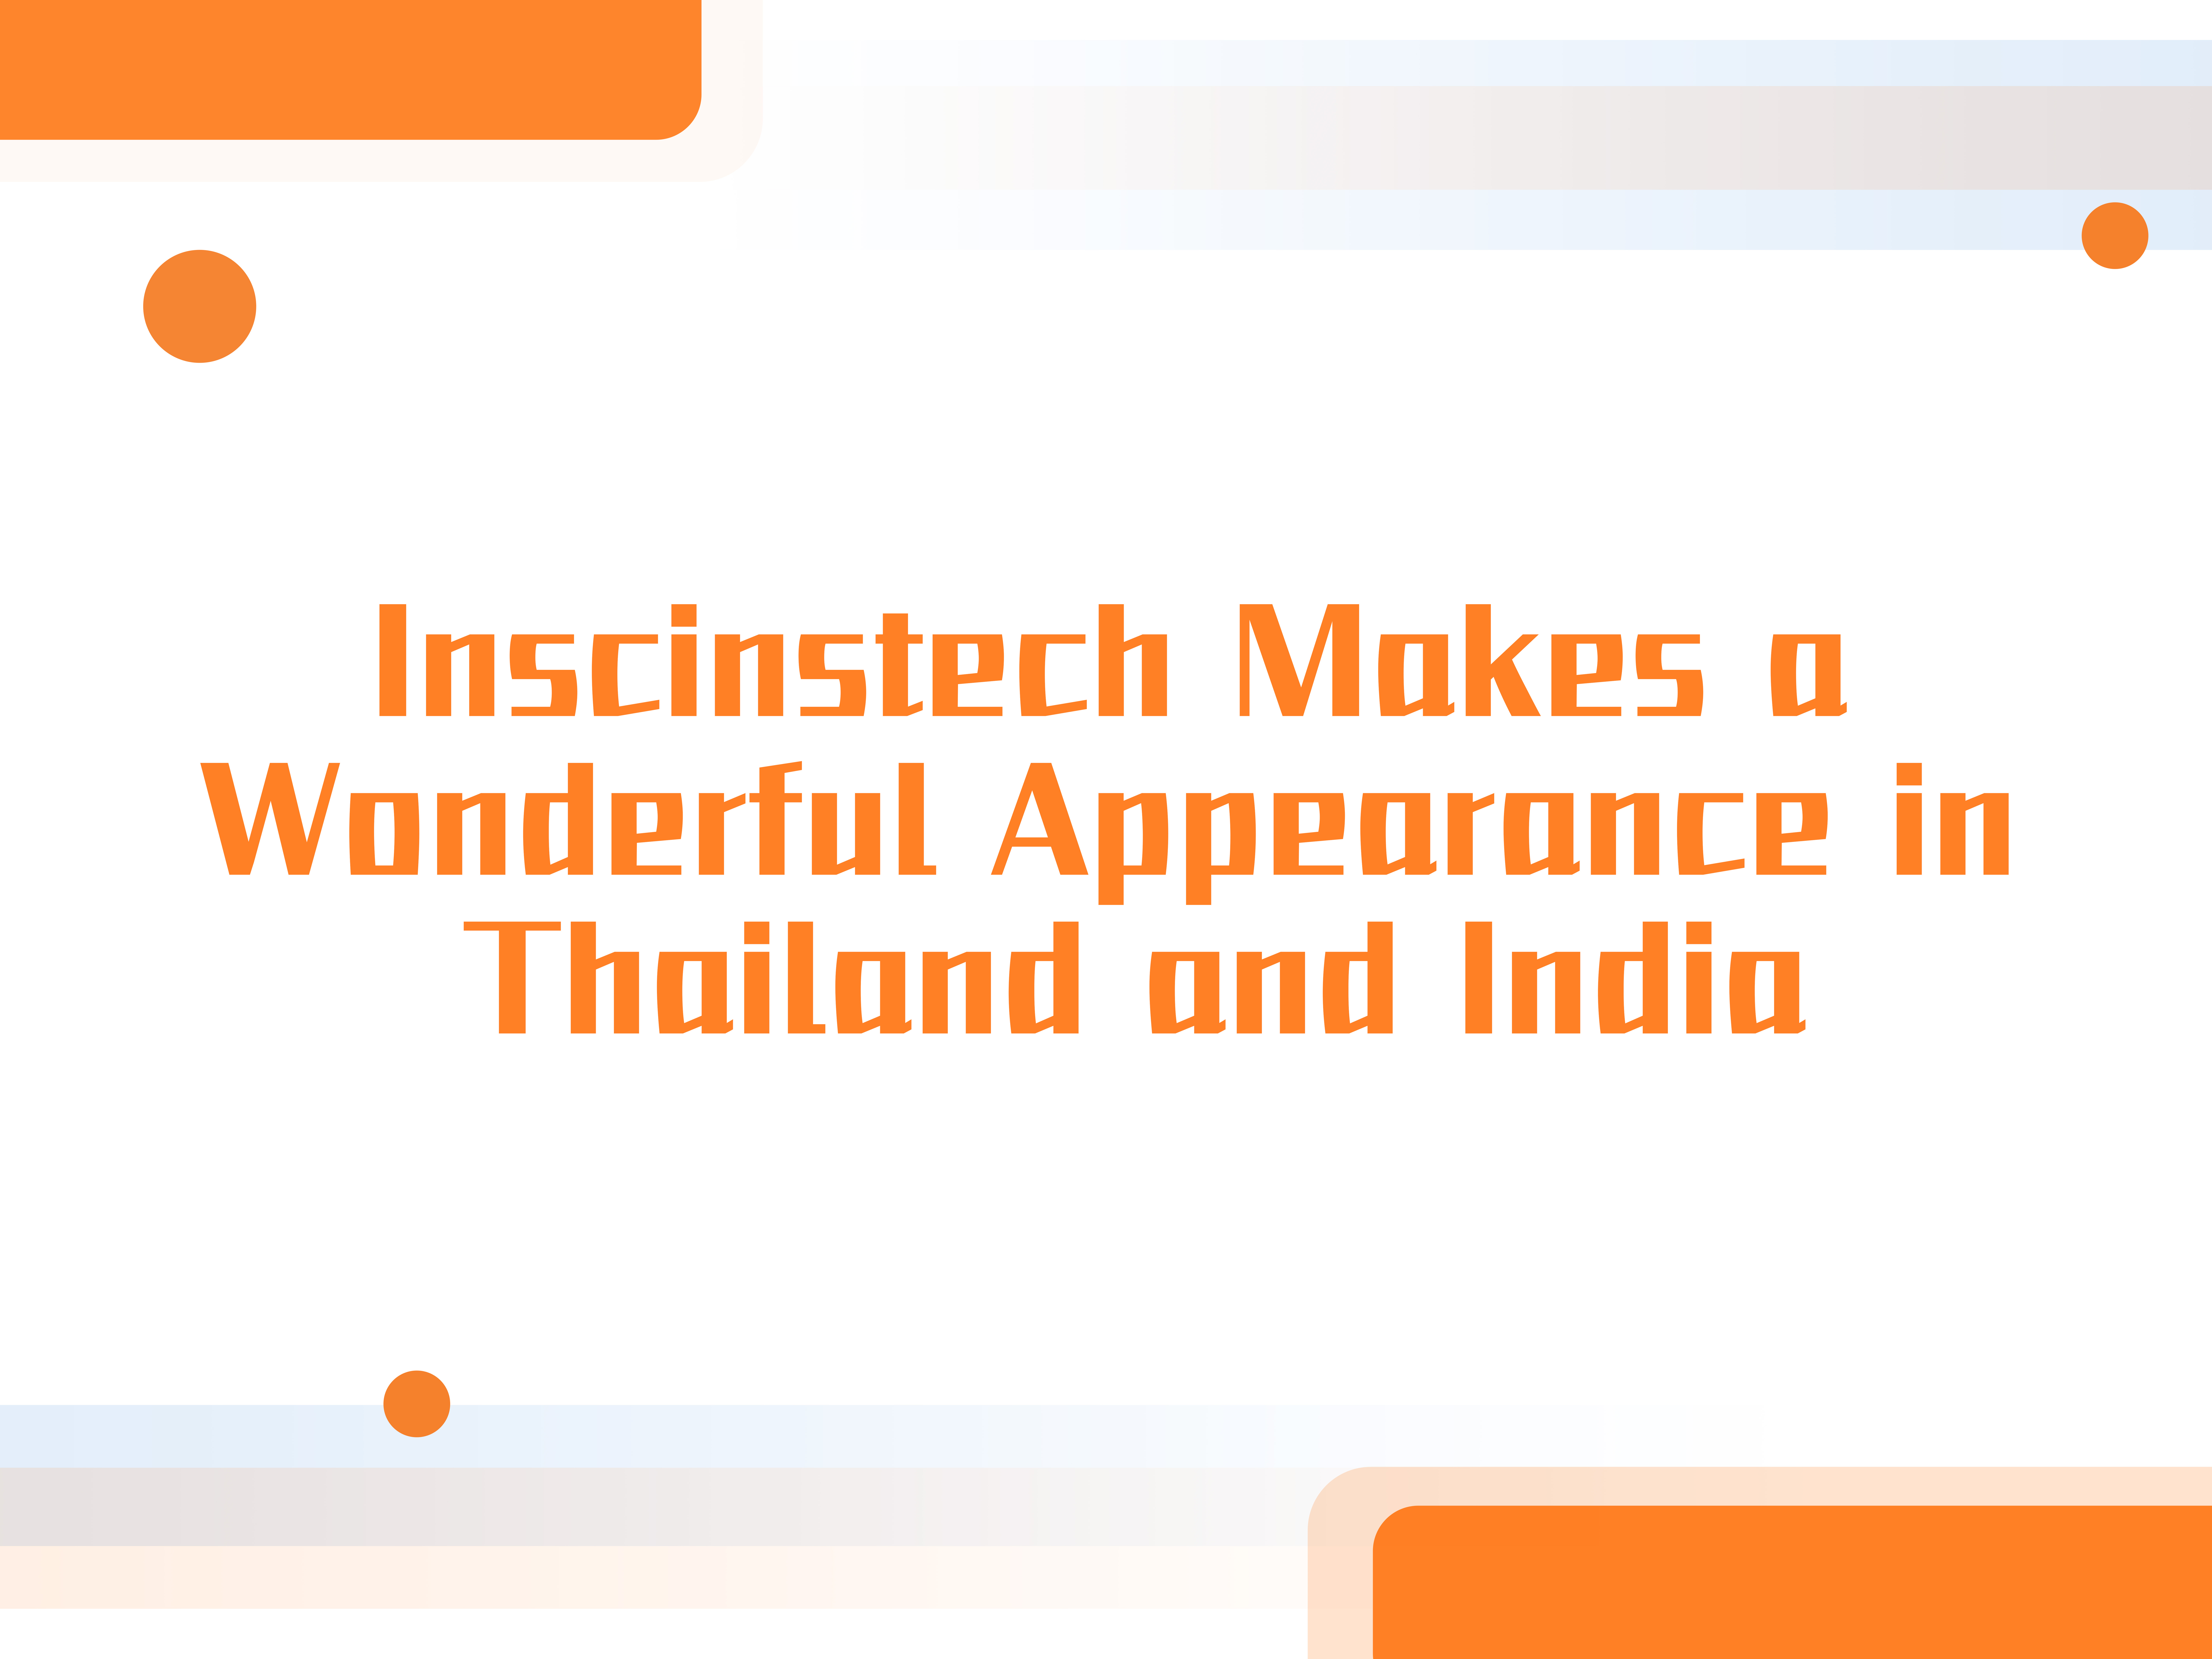 Inscinstech Makes a Wonderful Appearance in Thailand and India